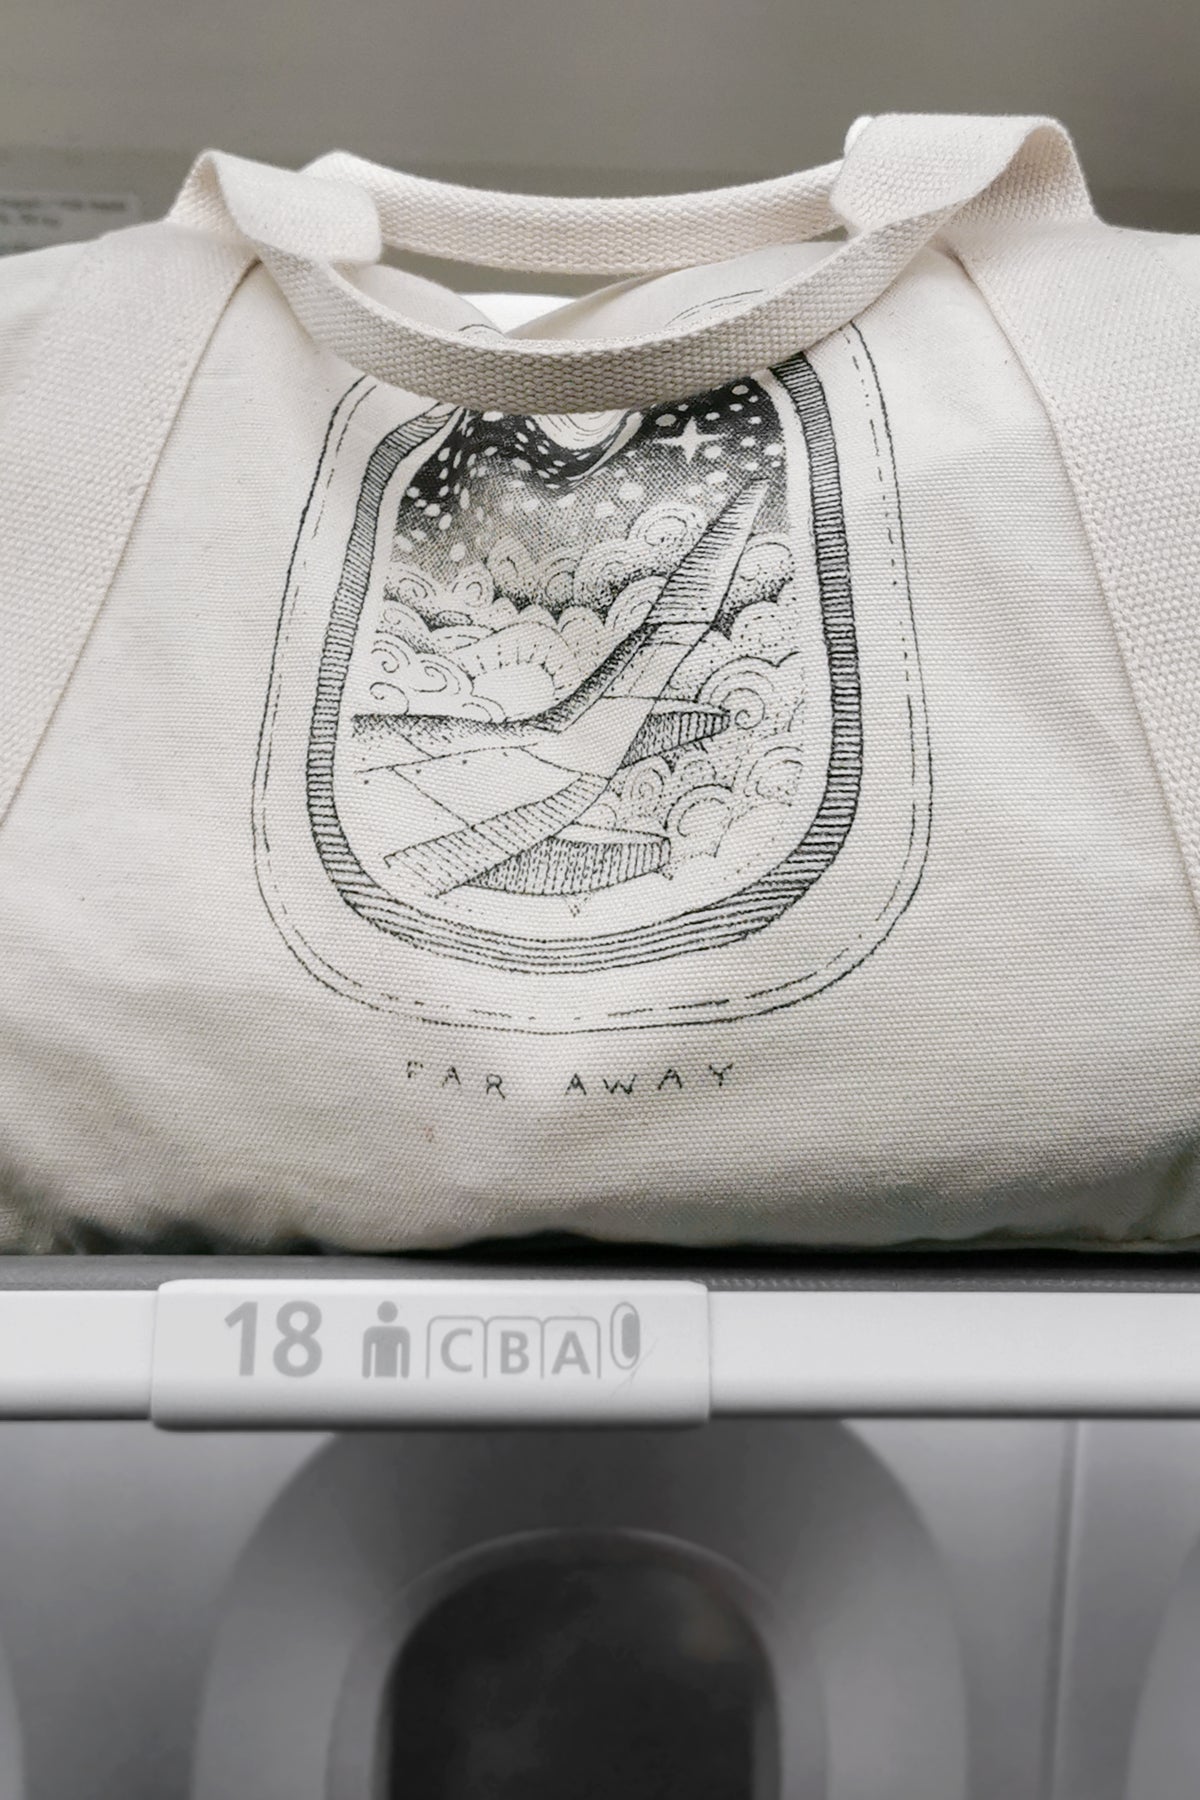 Off-White Duffle Bag With Plane and Moon Illustration as hand luggage